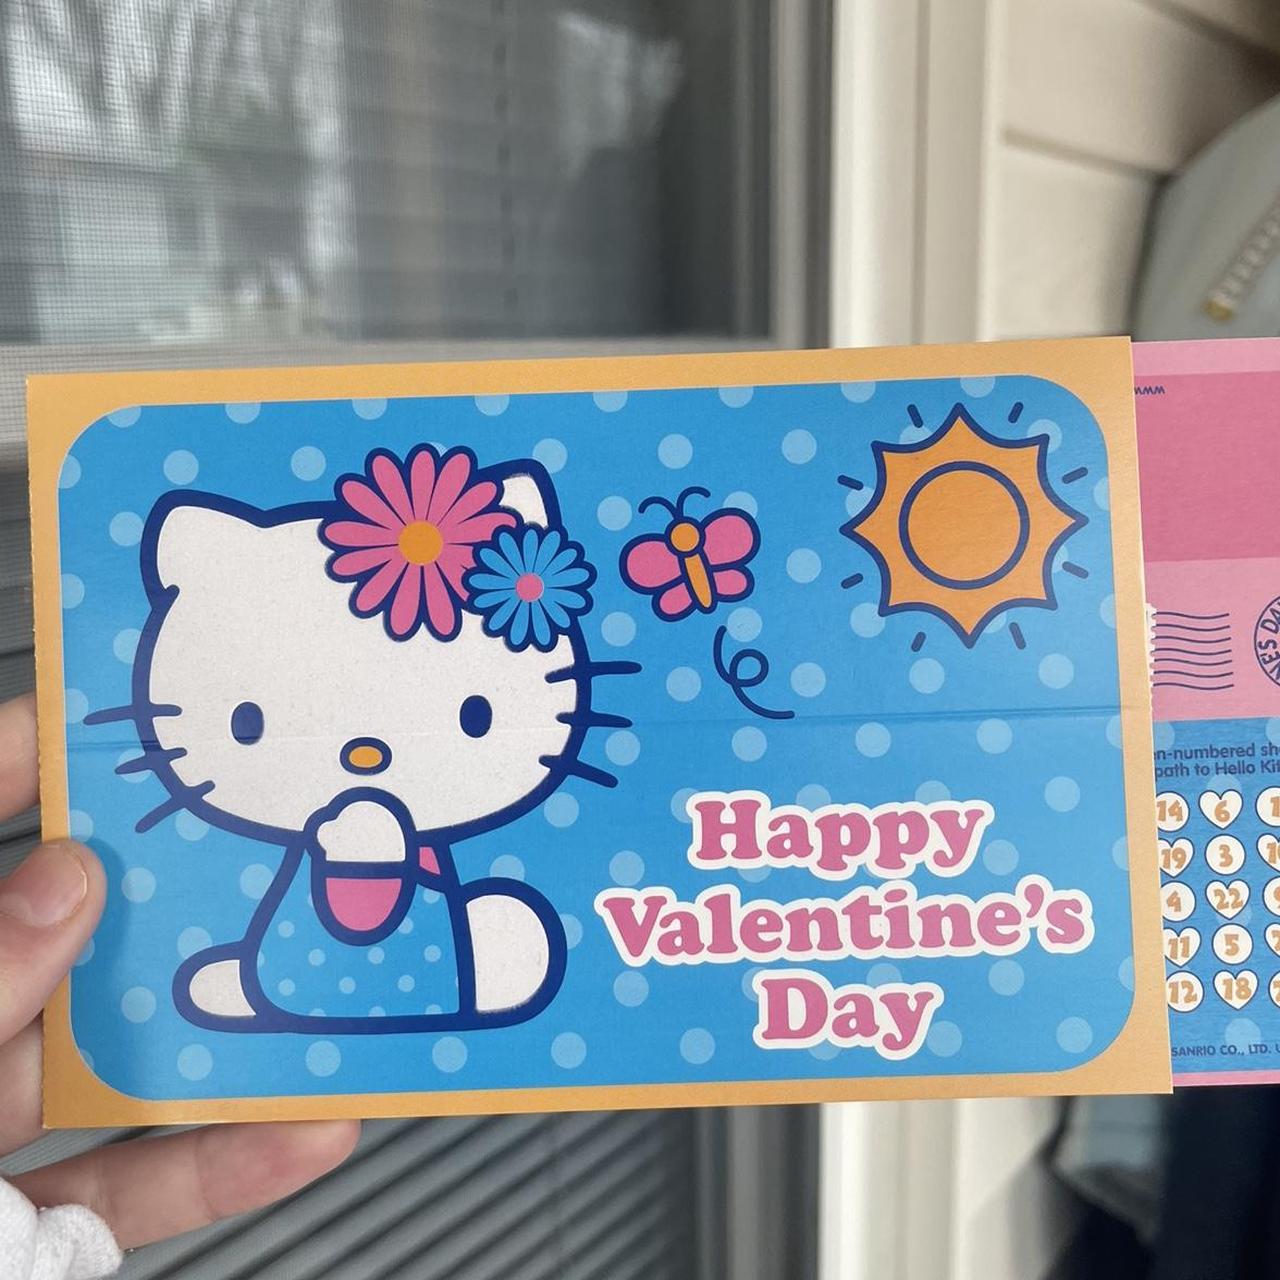 Hello kitty valentine's day cards from 2007. In - Depop